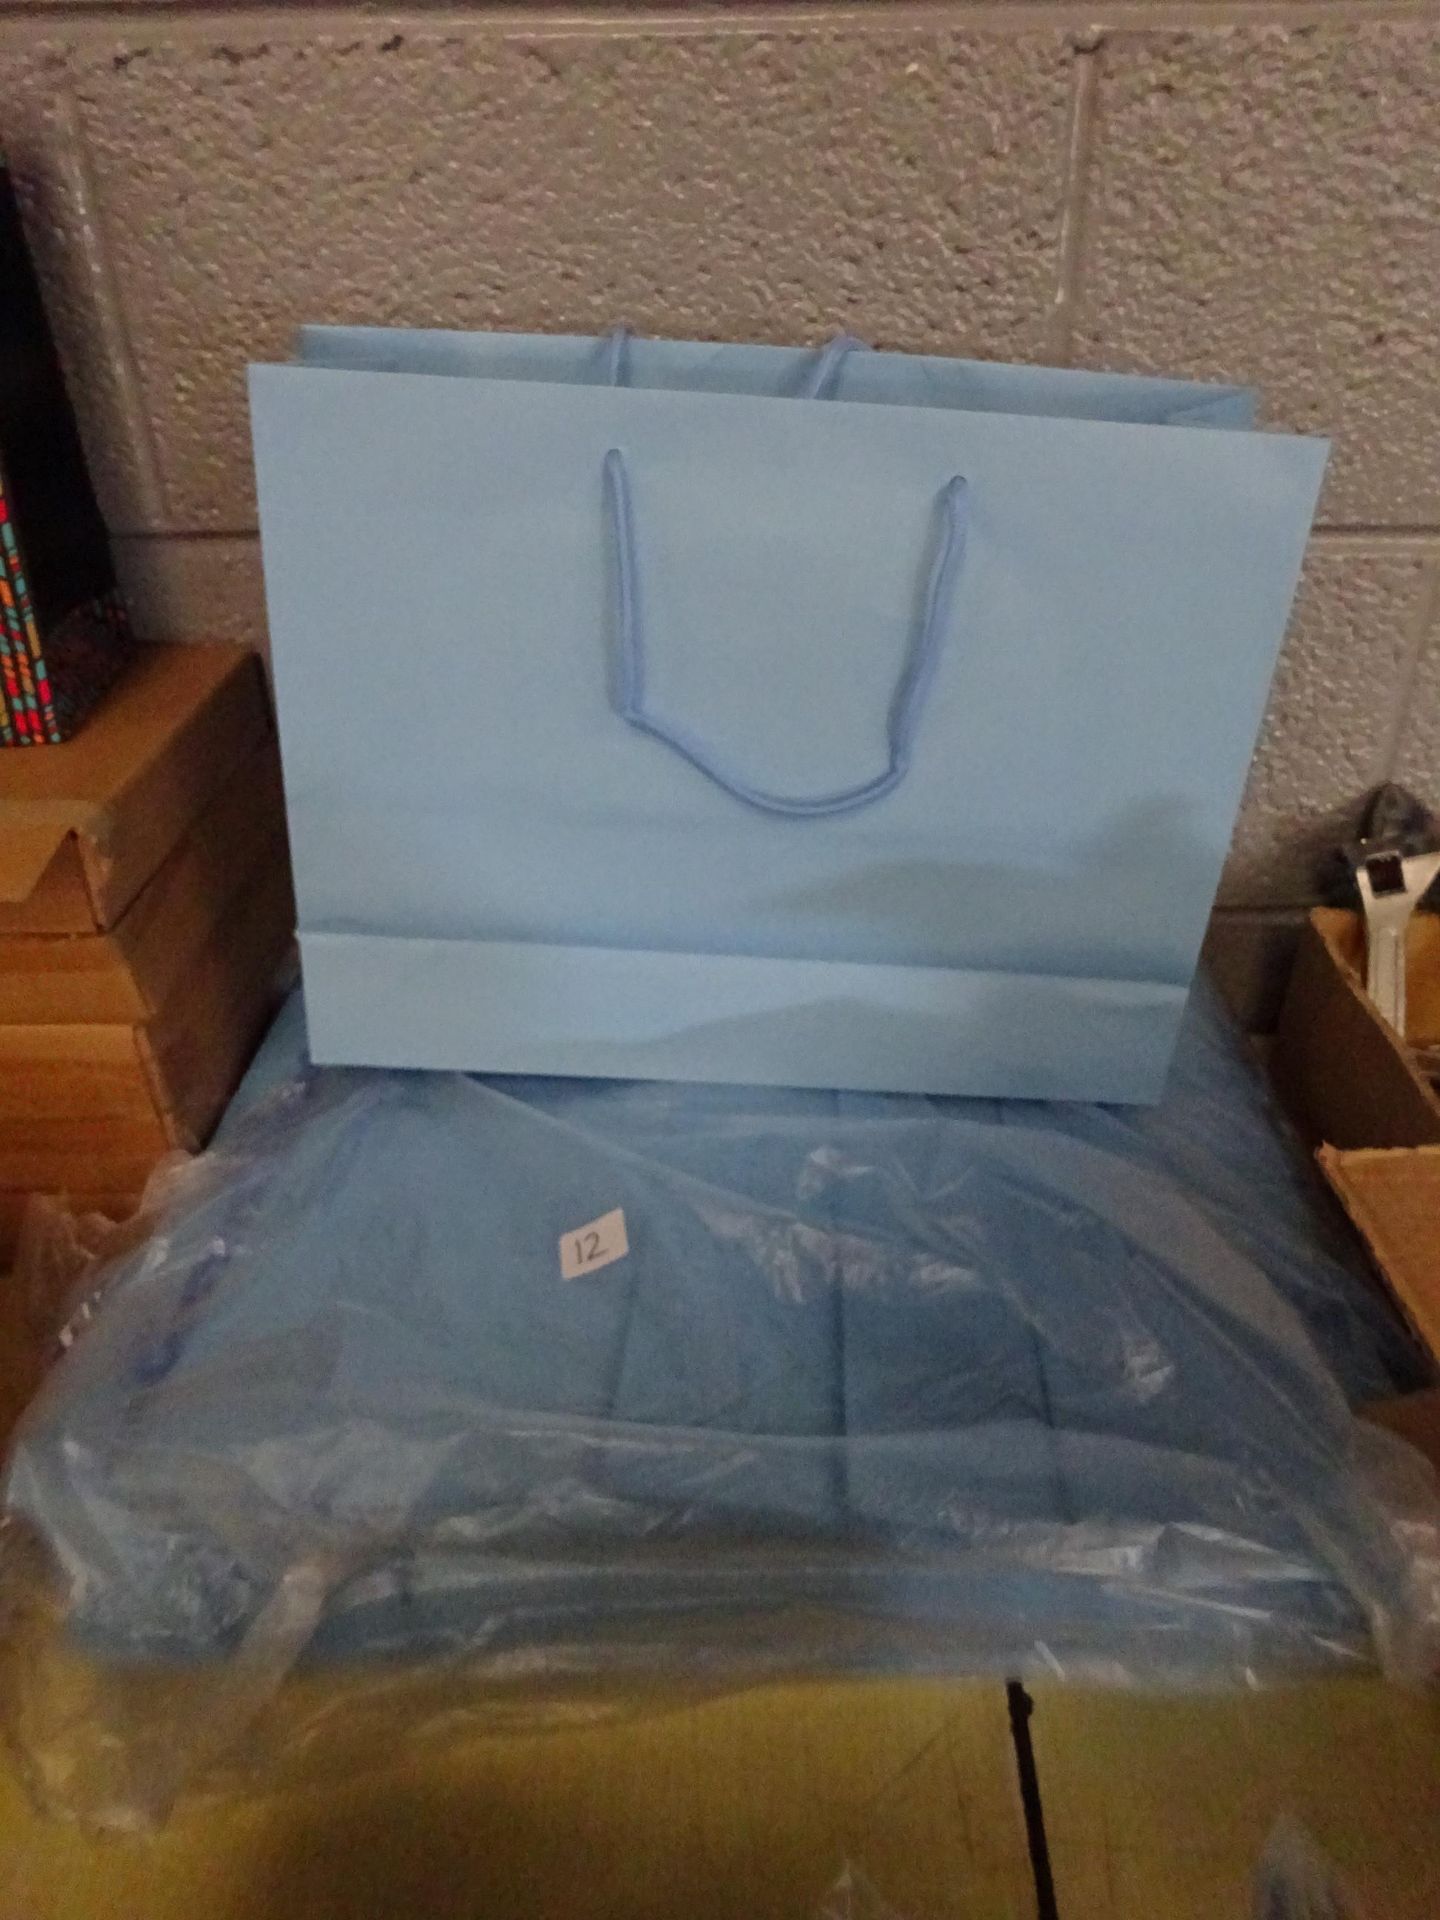 PACK OF 12 LG BLUE GIFT BAGS